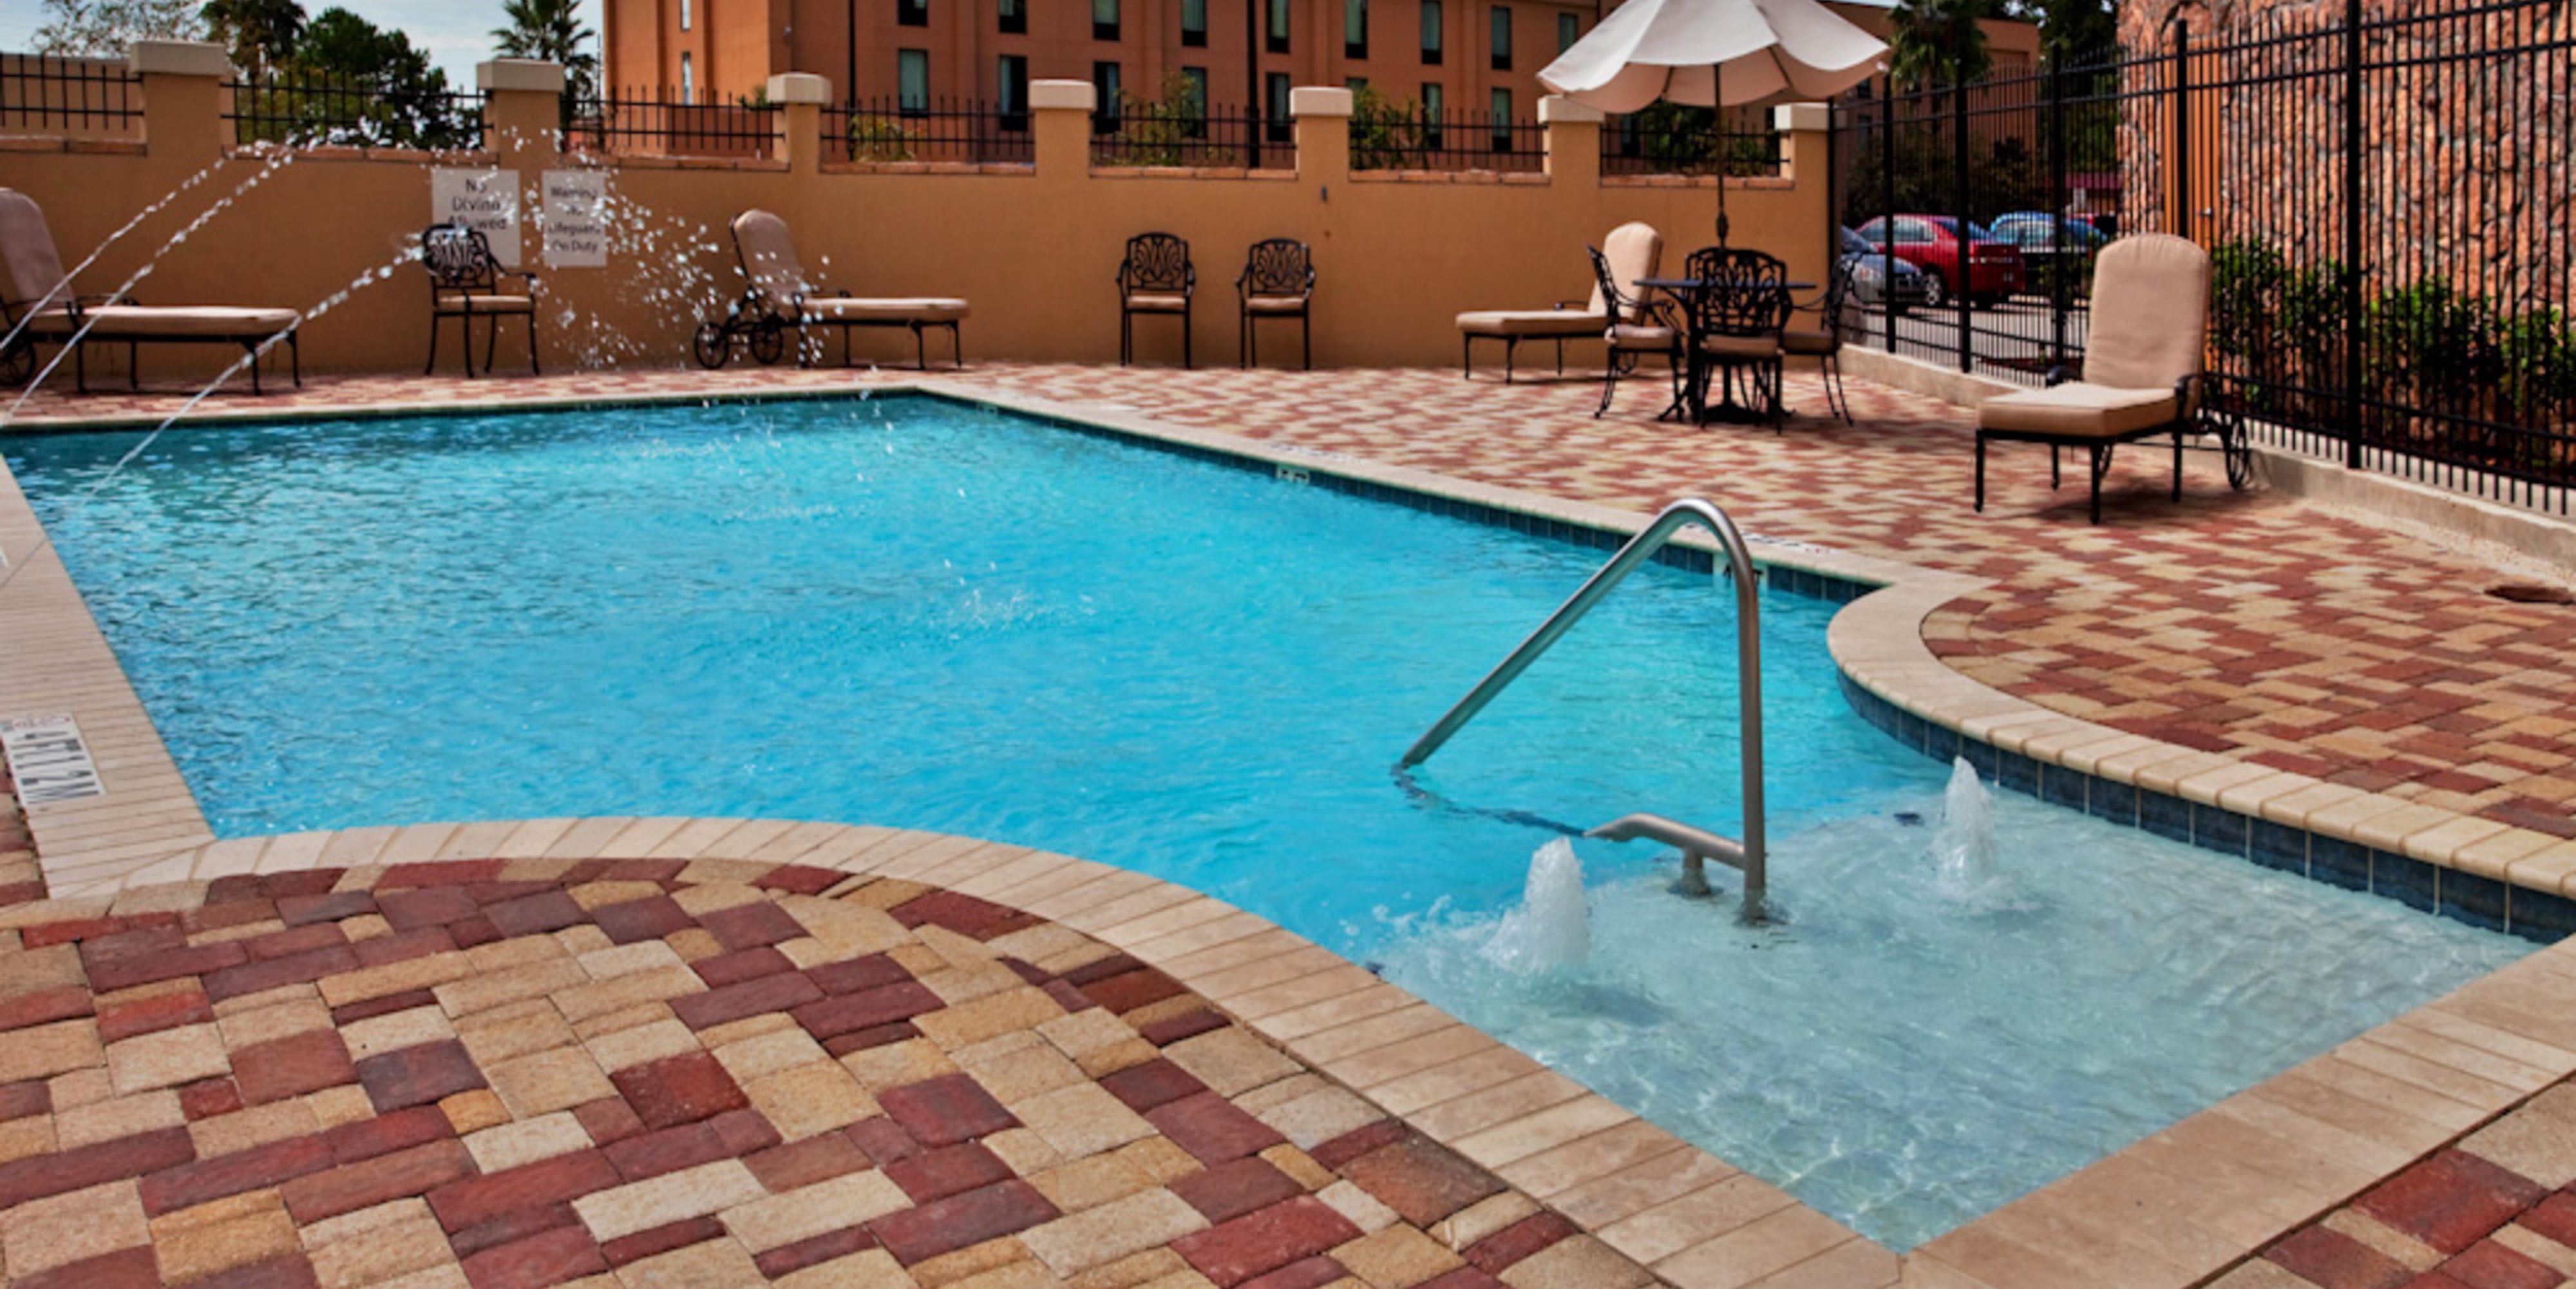 Make a point to turn off your brain and relax in the newly renovated pool area. The weather in South Louisiana is perfect for sitting by a beautiful pool.   